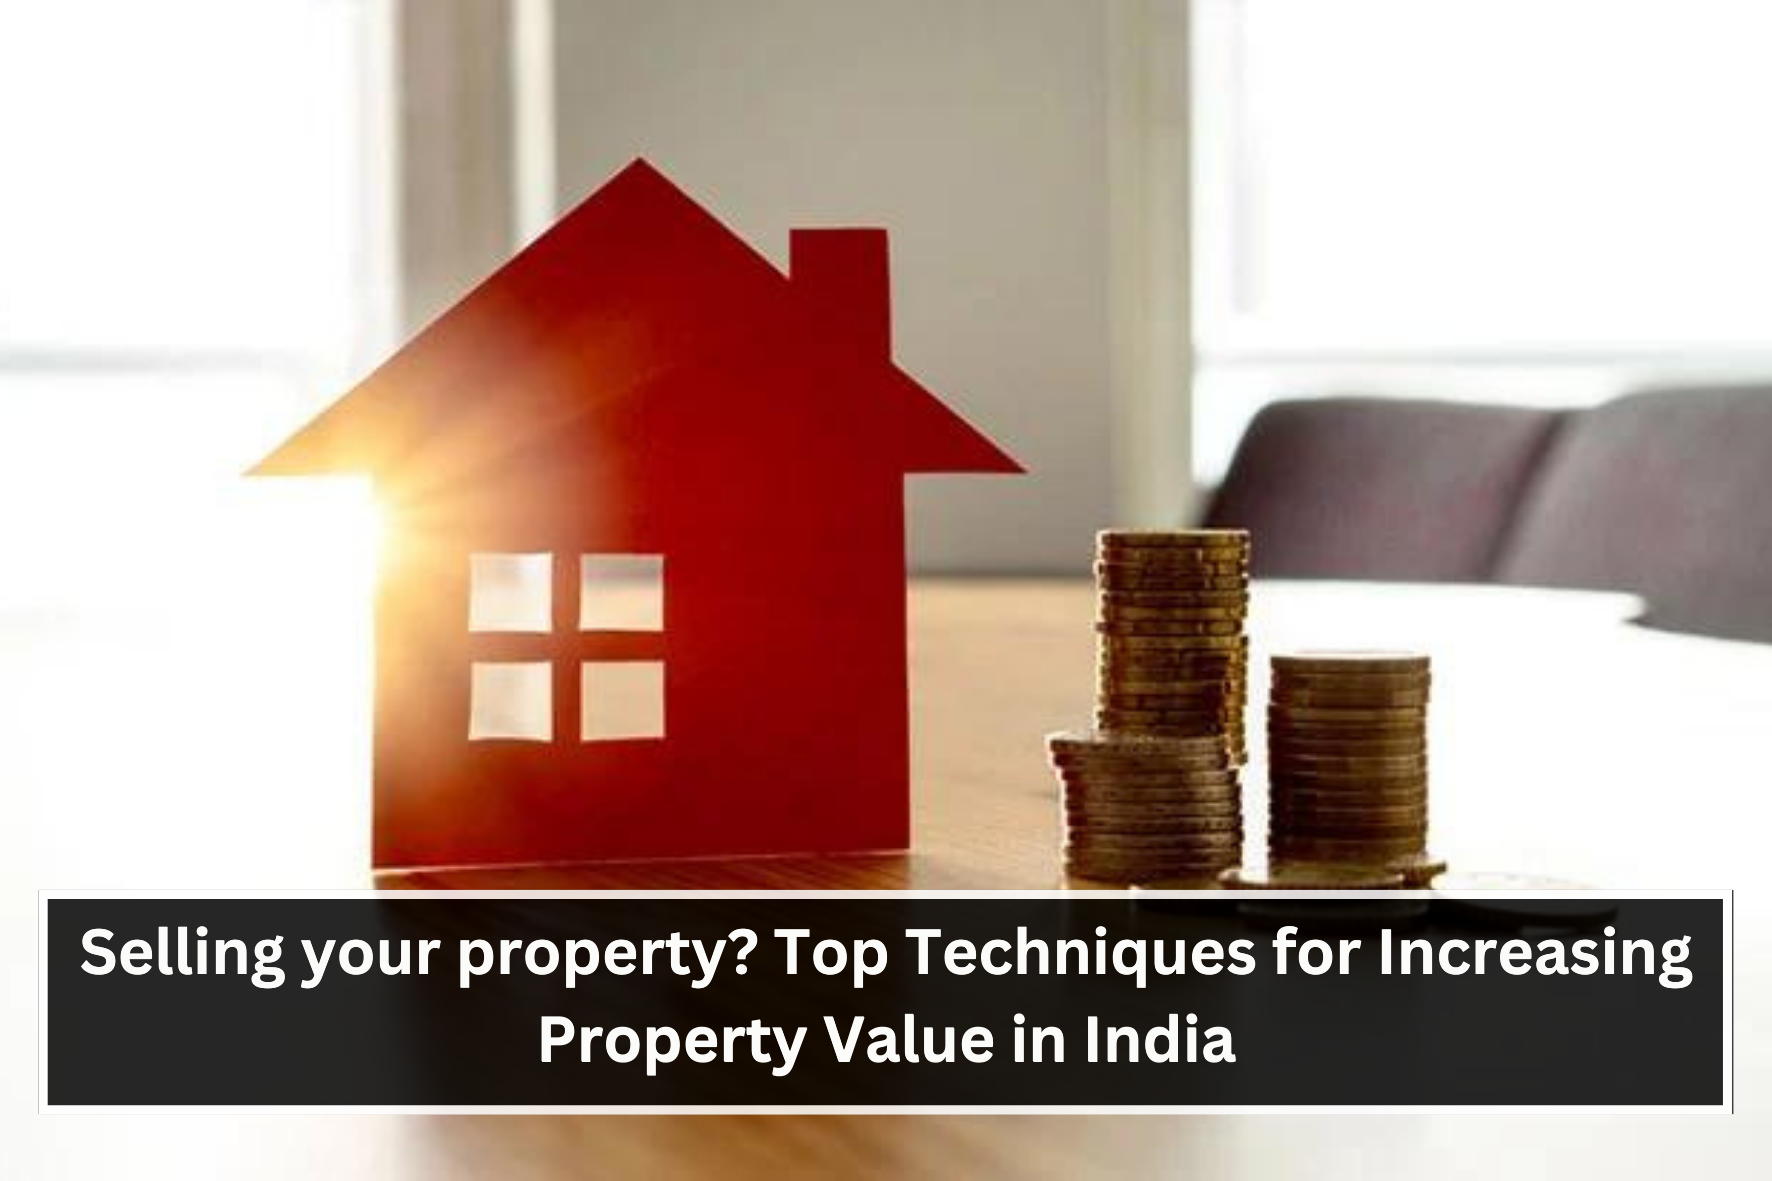 uploads/blog/Selling_a_PropertyTop_Techniques_for_Increasing_Property_Value_in_Indiaubheading.png